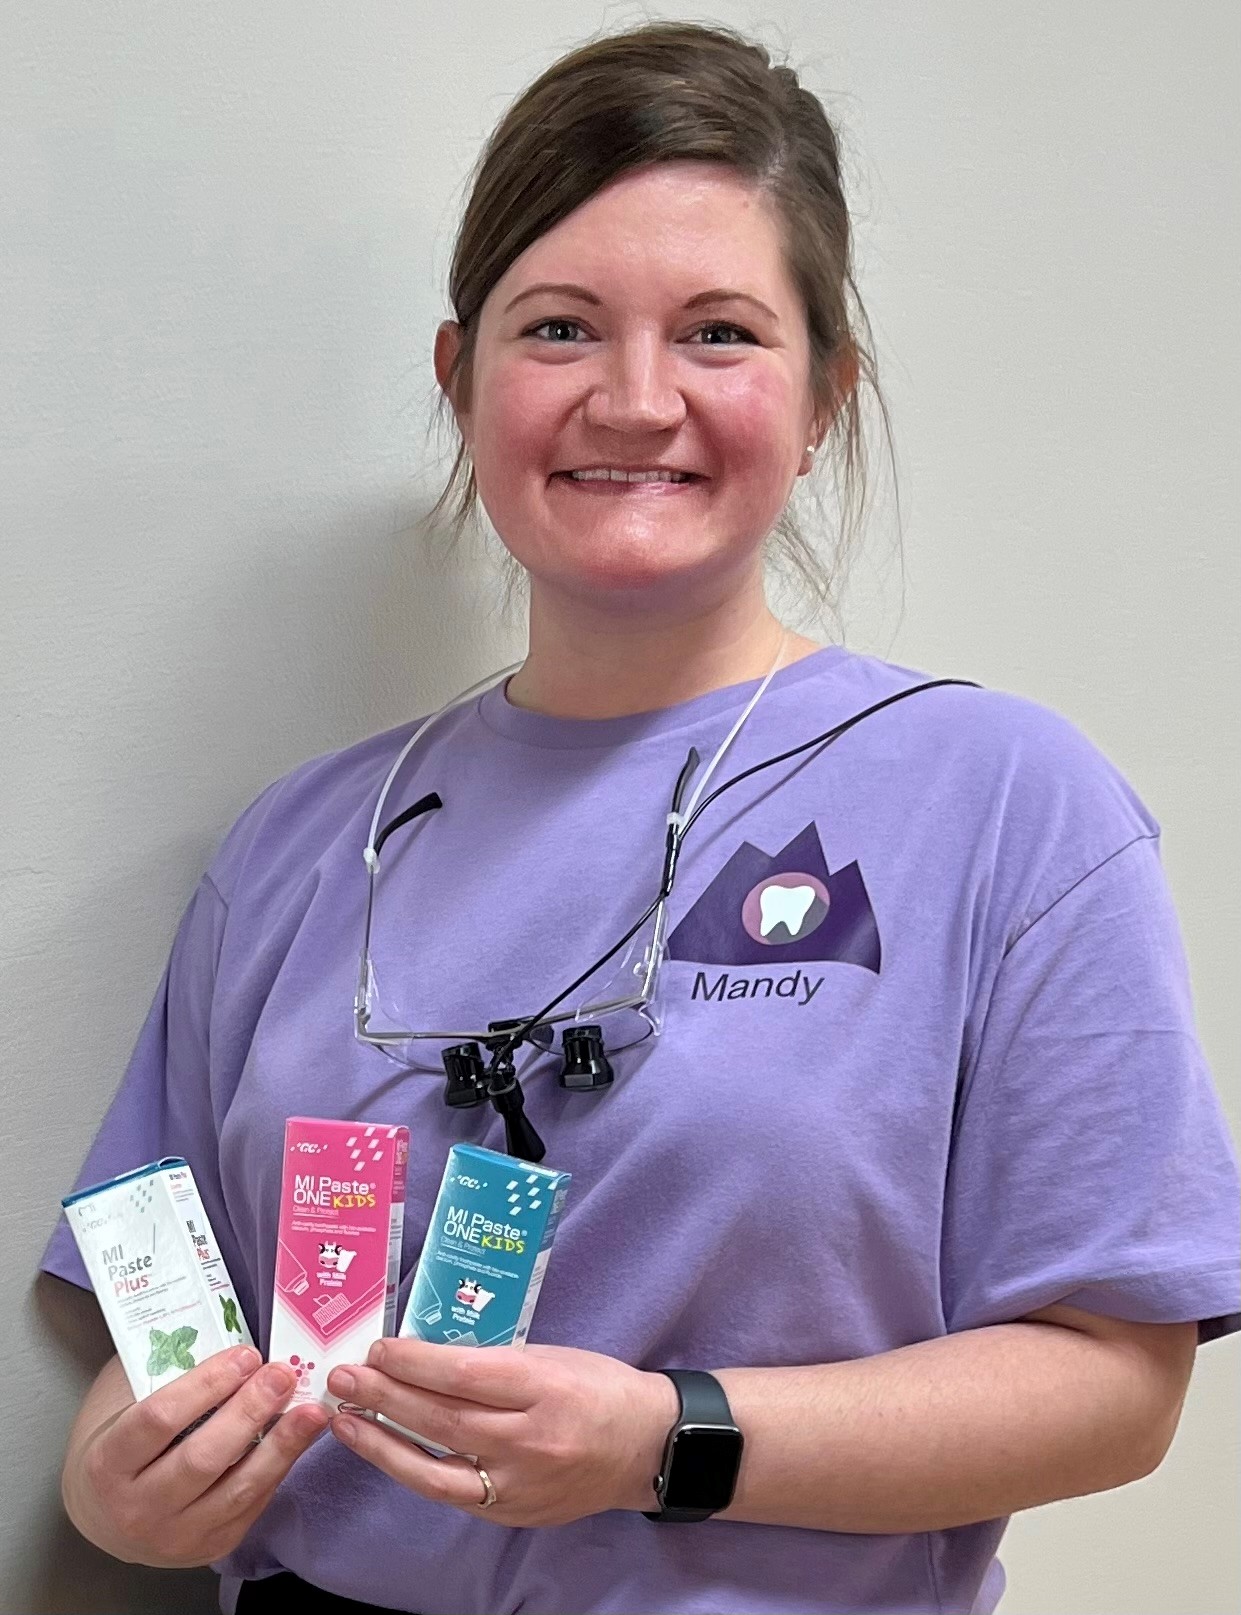 MI Paste Products ManiDental Family Practice Elkin, NC